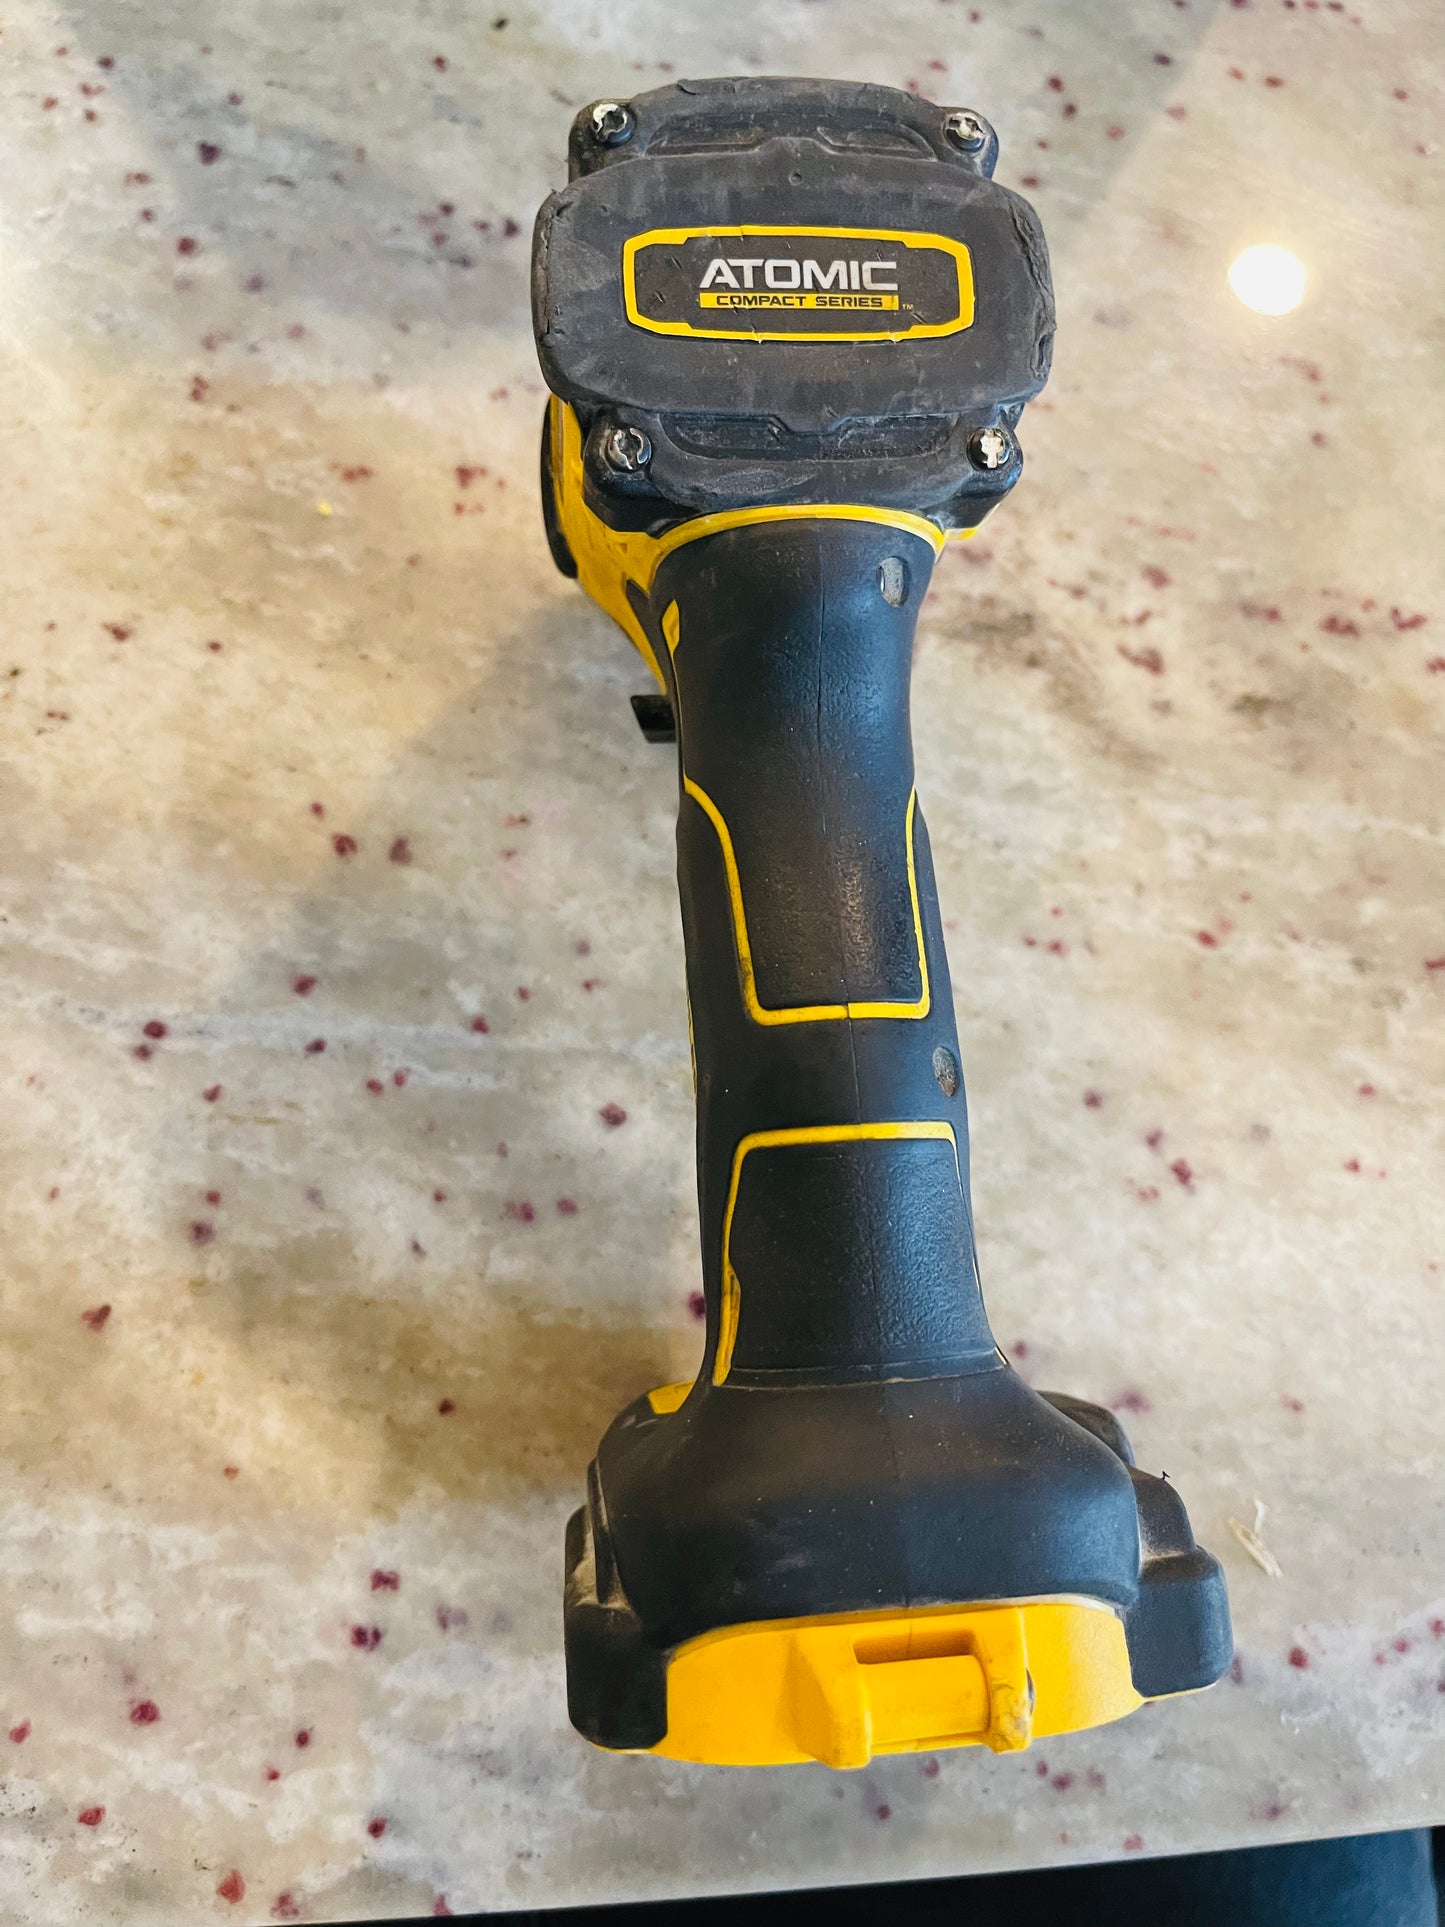 DEWALT
ATOMIC 20V MAX Brushless Compact 1/4 in. Impact Driver (Tool Only)